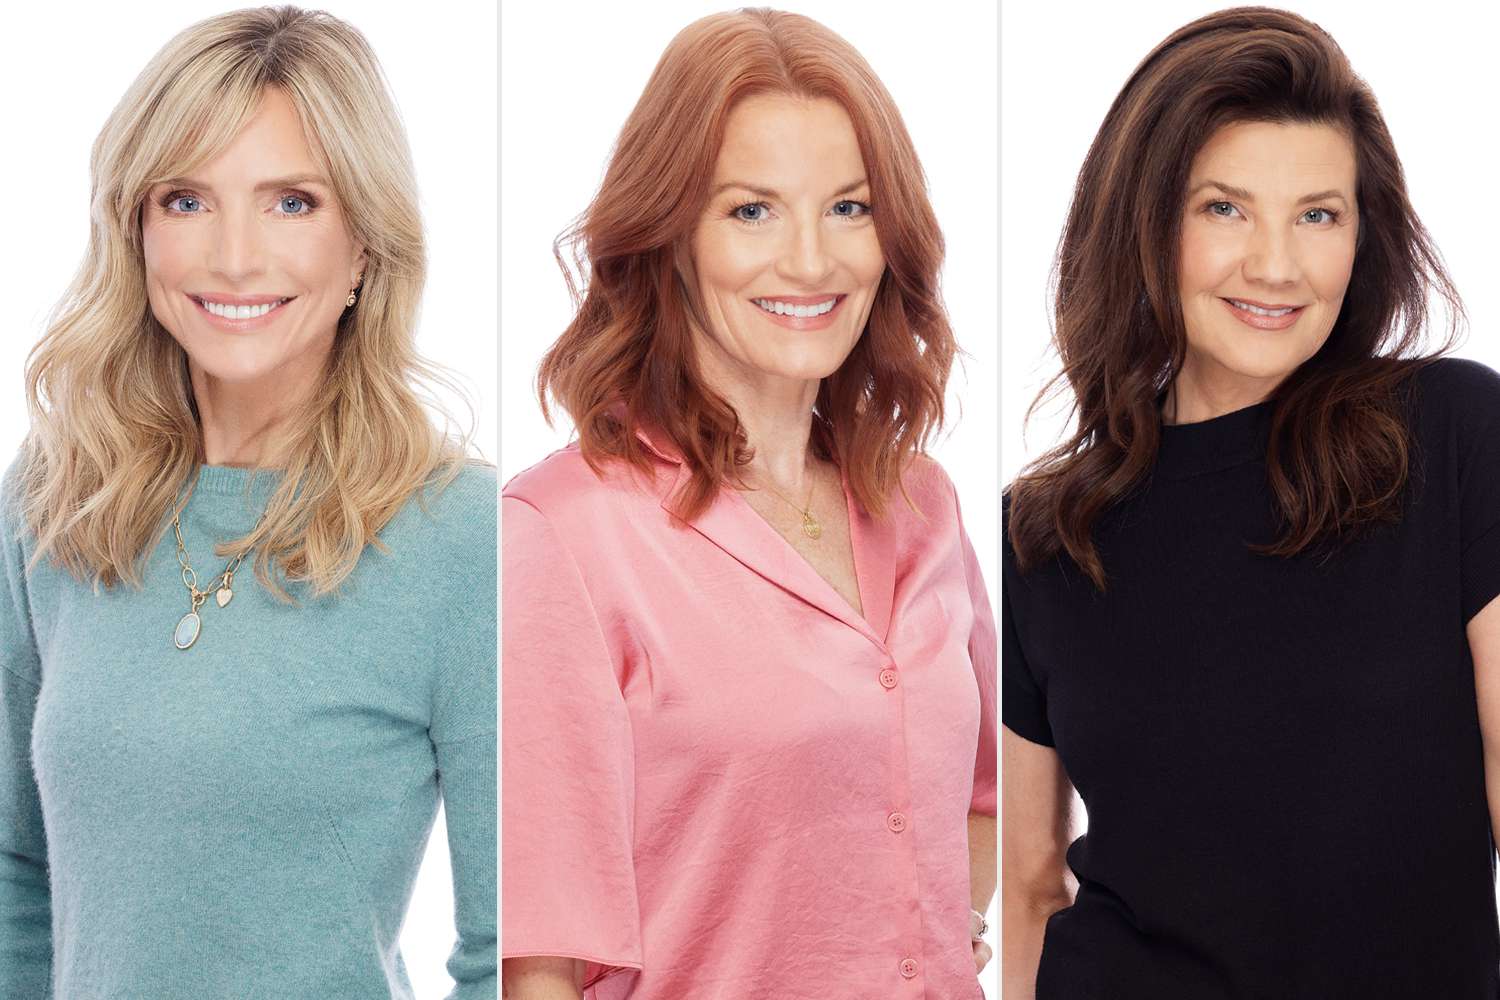 Melrose Place's Courtney Thorne-Smith, Laura Leighton and Daphne Zuniga Launch New Rewatch Podcast (Exclusive)